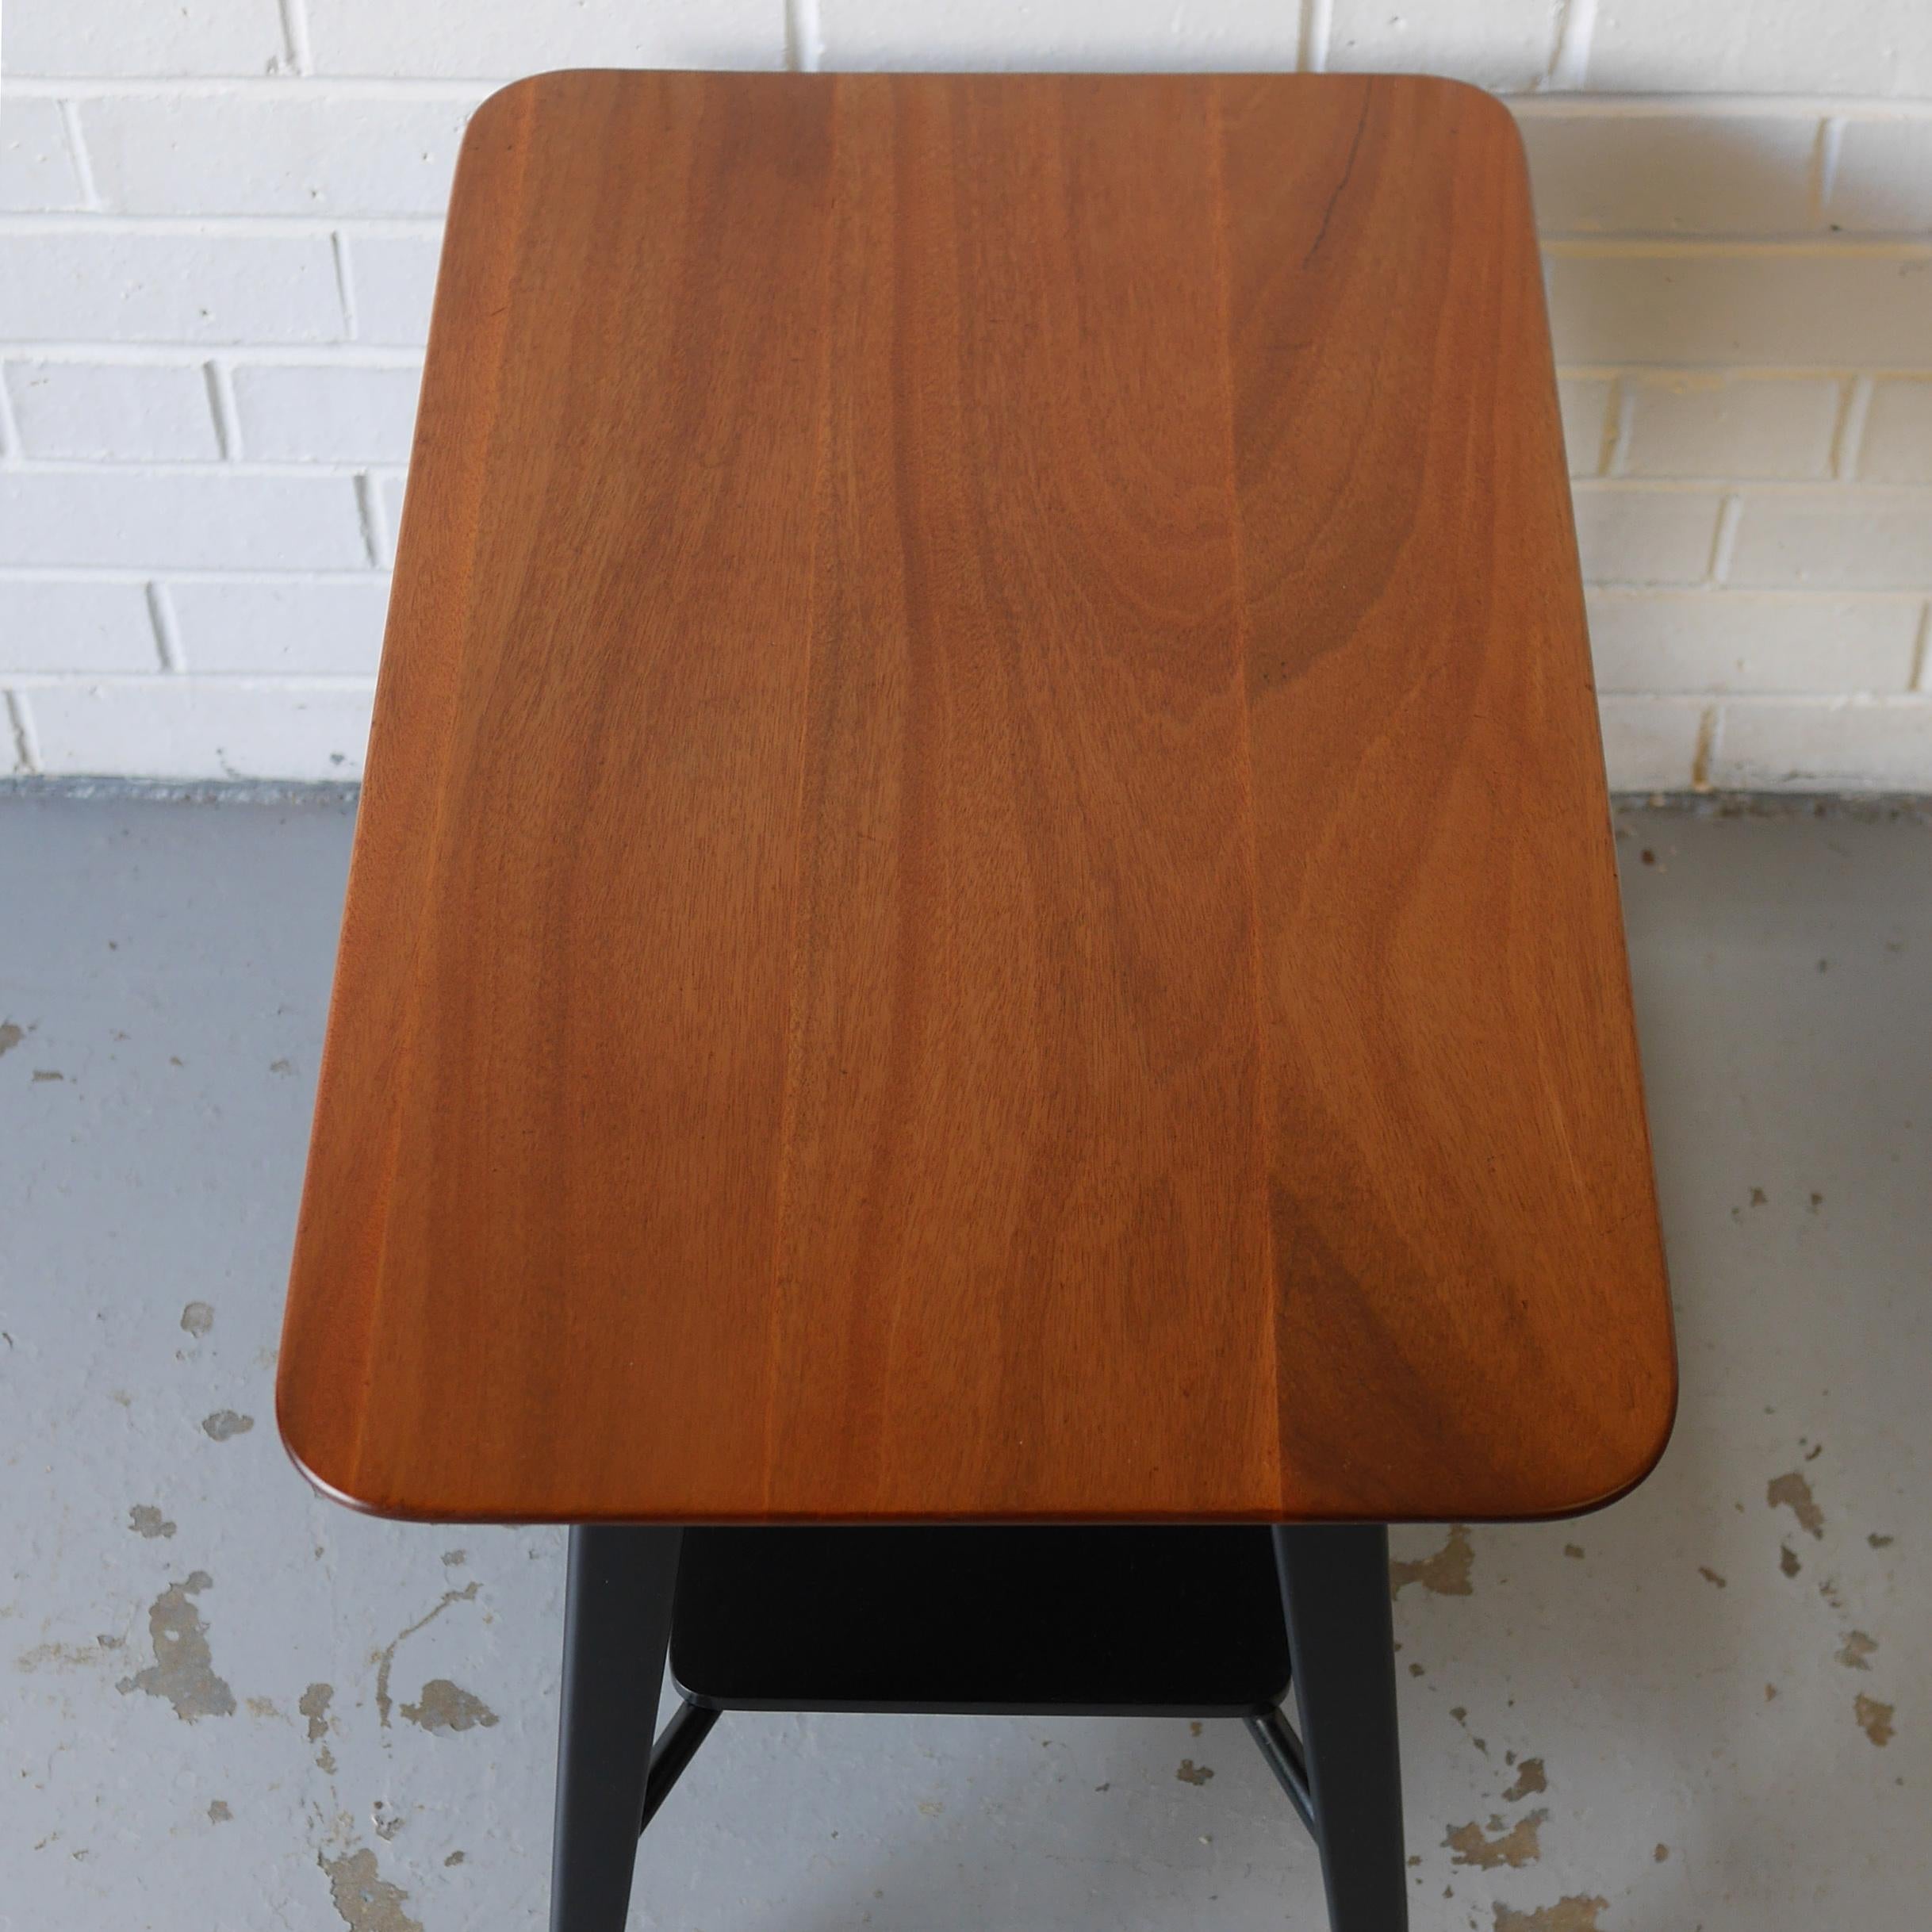 Mid-20th Century Solid Mahogany Coffee or Lamp Table by Vanson, circa 1955 For Sale